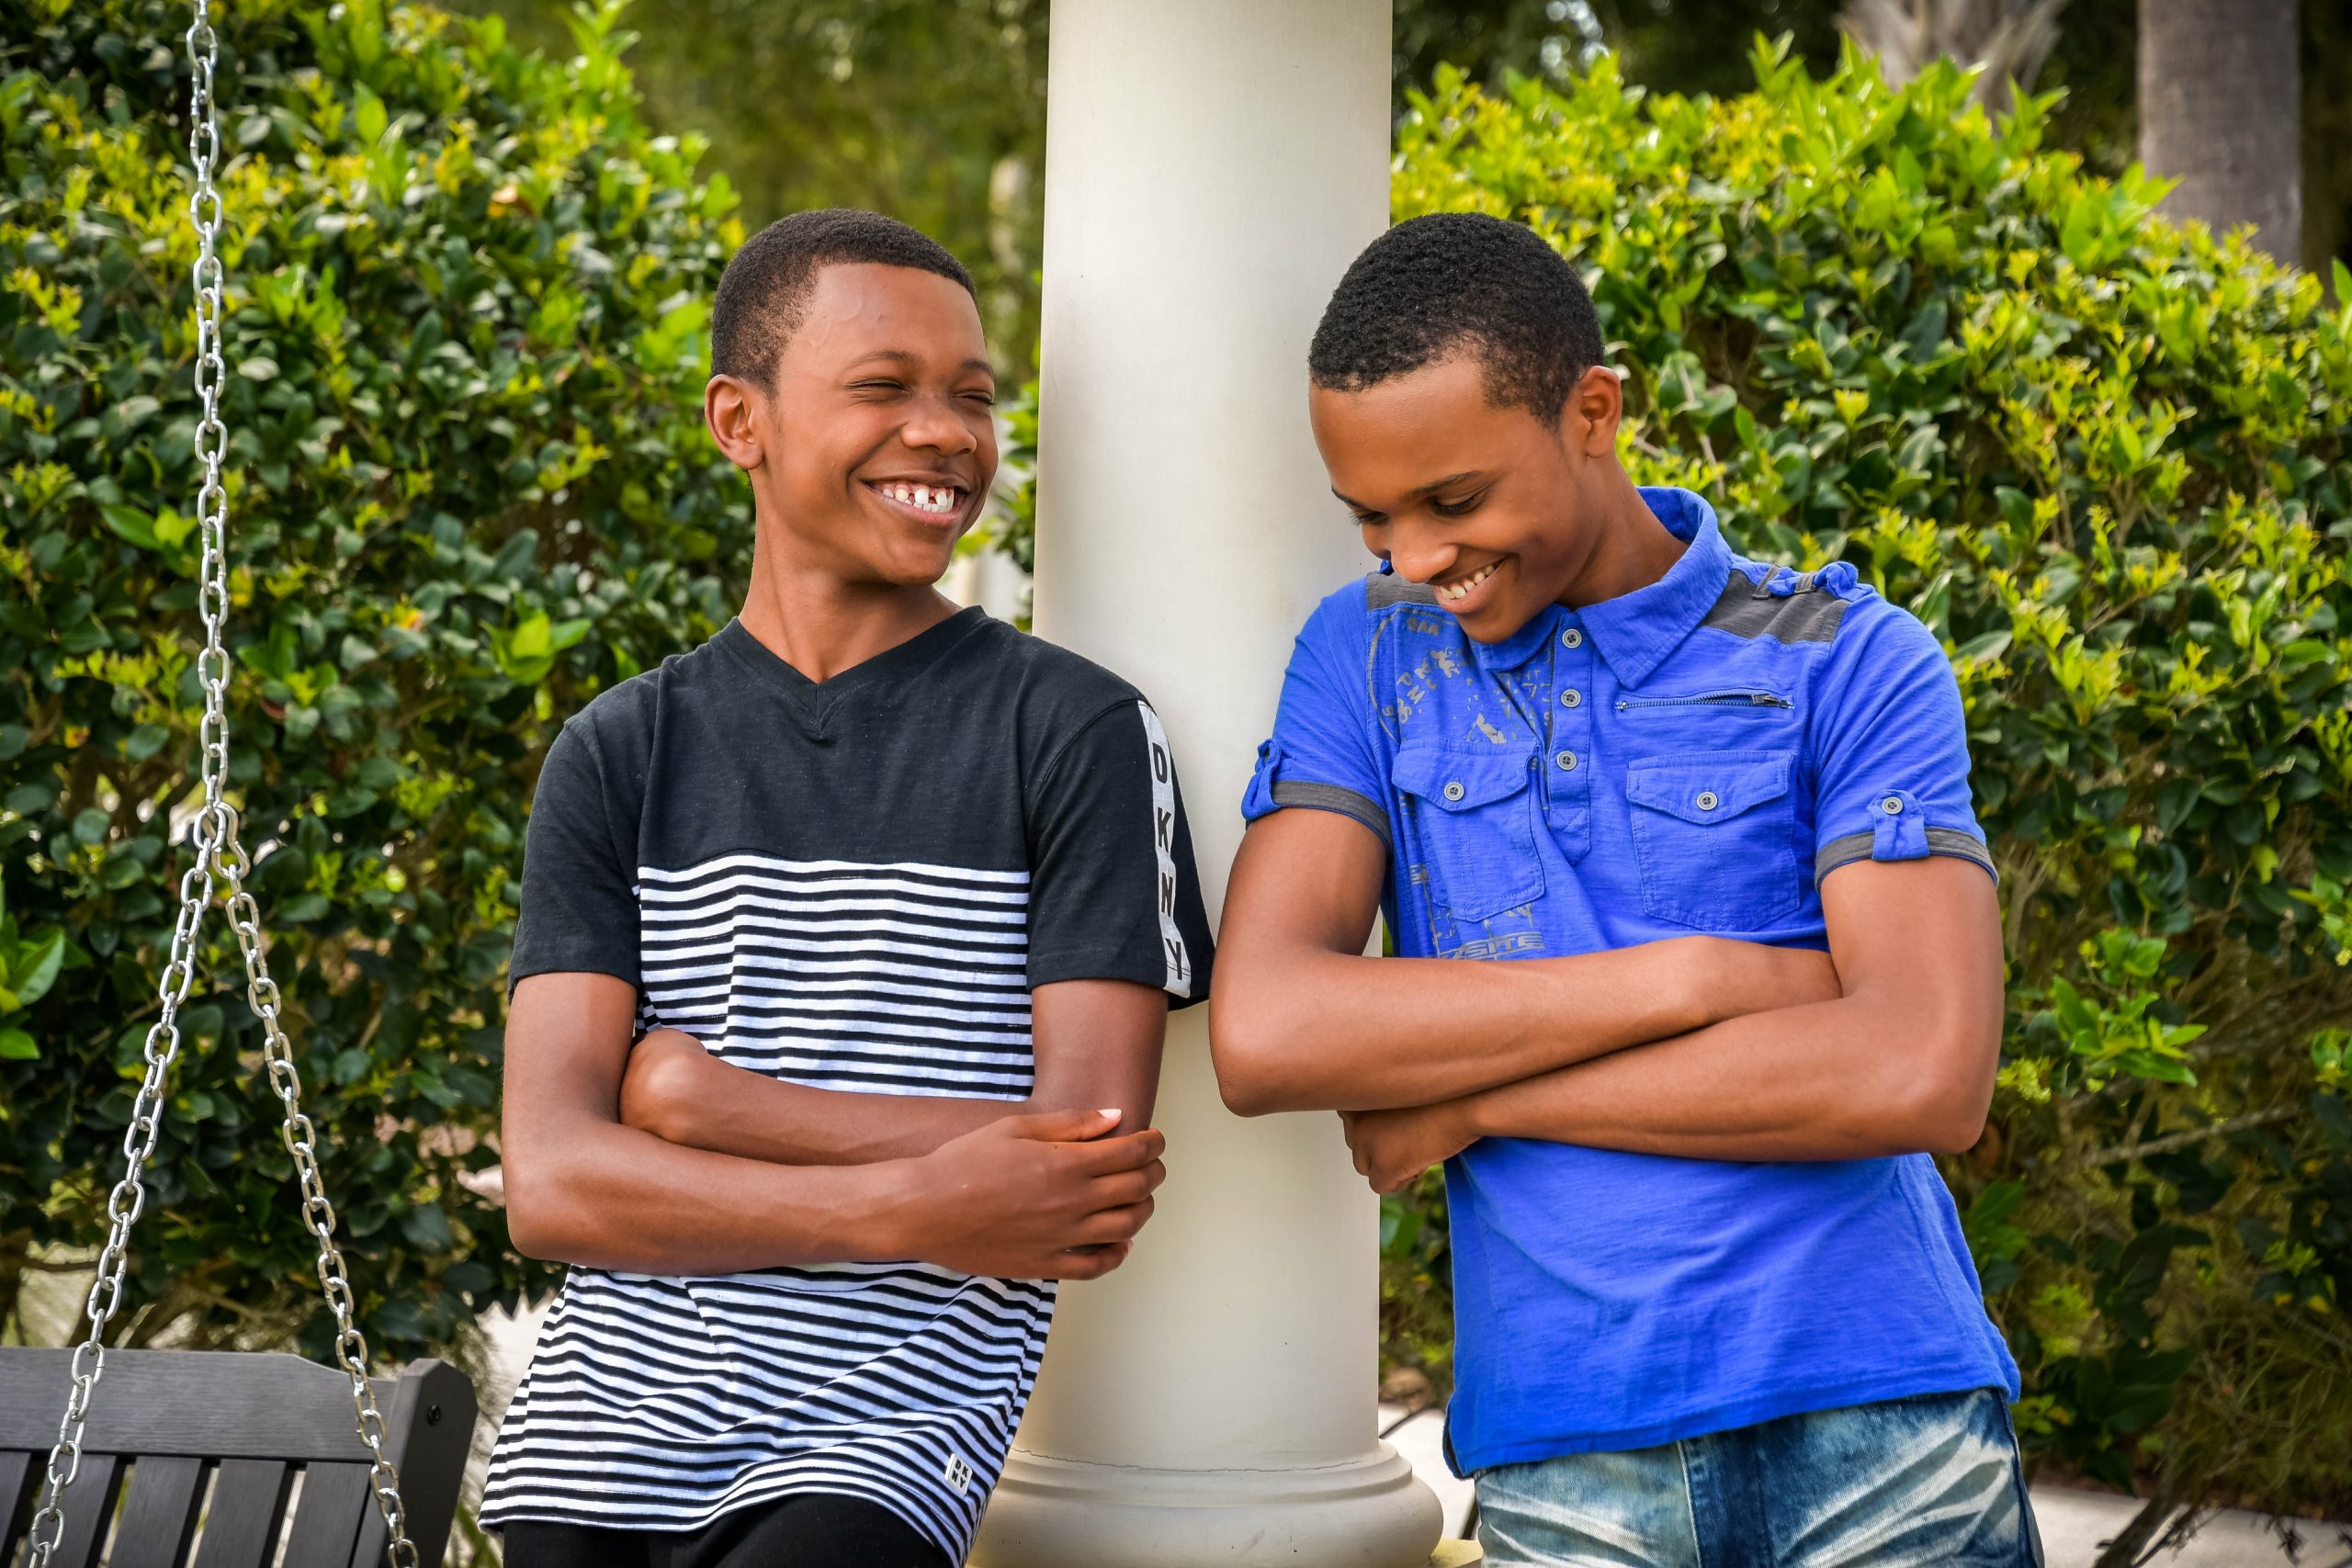 Two young black boys lean against a pole and smile and chat. The one on he left wears a navy and white t-shirt and the one on the right wears a bright blue one.